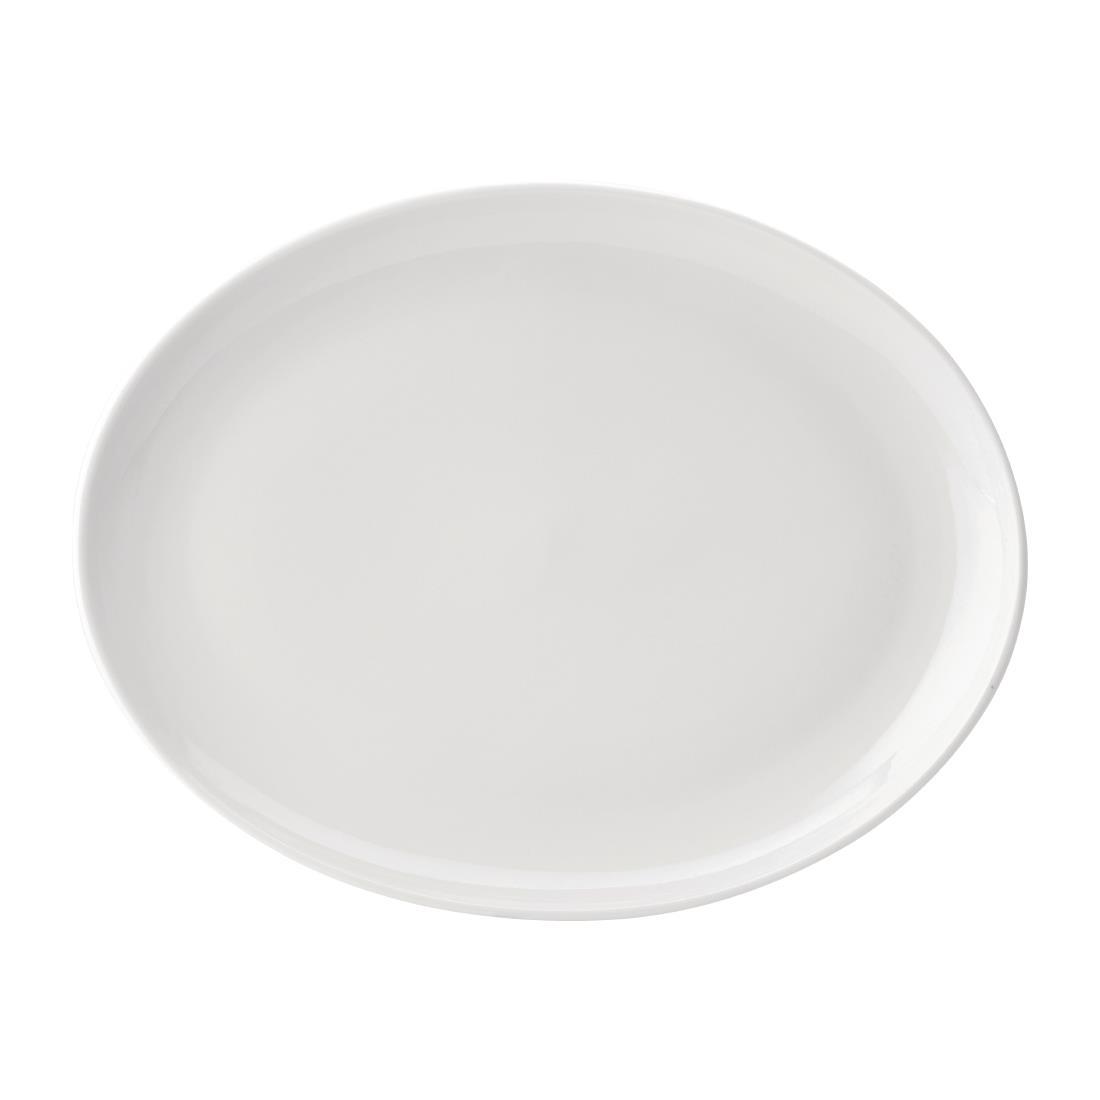 Utopia Pure White Oval Plates 360mm (Pack of 18) - DY322  - 2